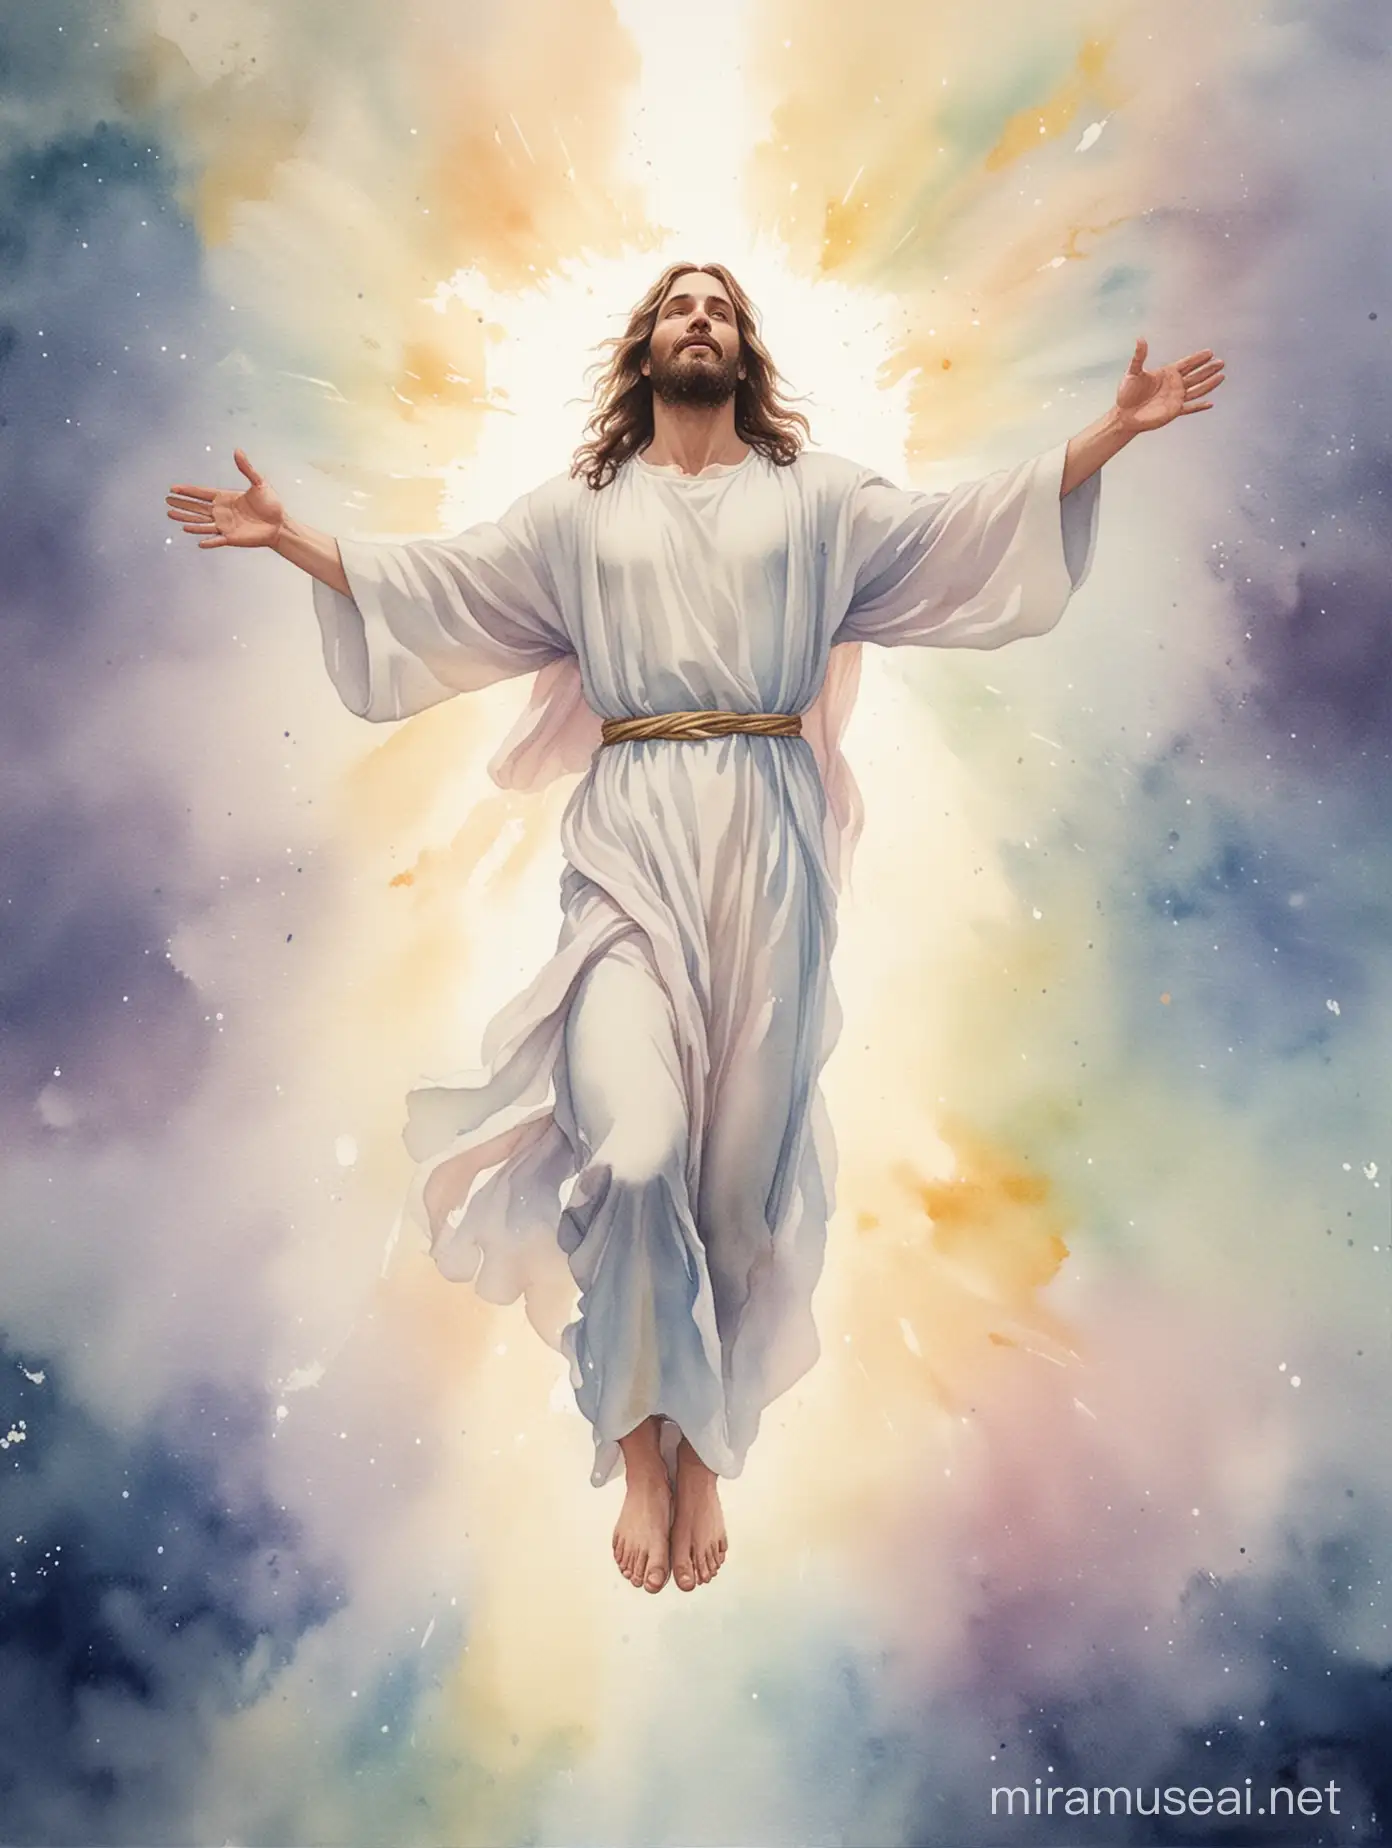 Jesus Christ ascending ethereal in watercolour Happy easter 